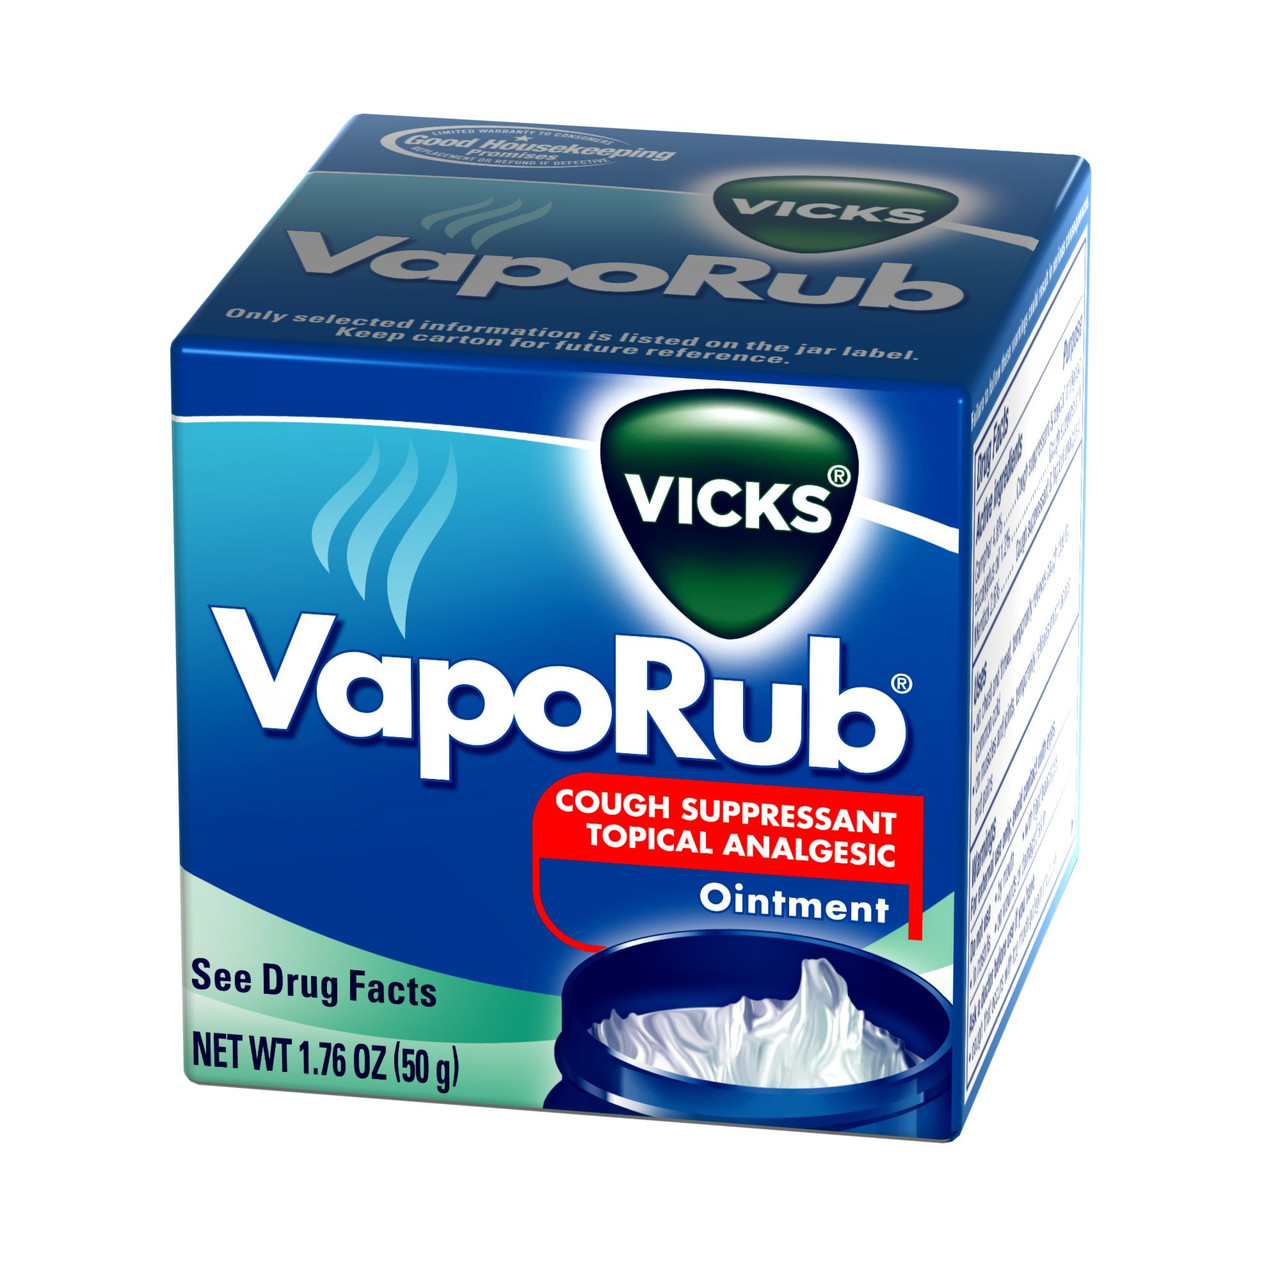 Vicks VapoRub, Chest Rub Ointment, Relief from Cough, Cold, Aches, & Pains  with Original Medicated Vicks Vapors, Topical Cough Suppressant, 1.76 OZ  Each (Pack of 2) 